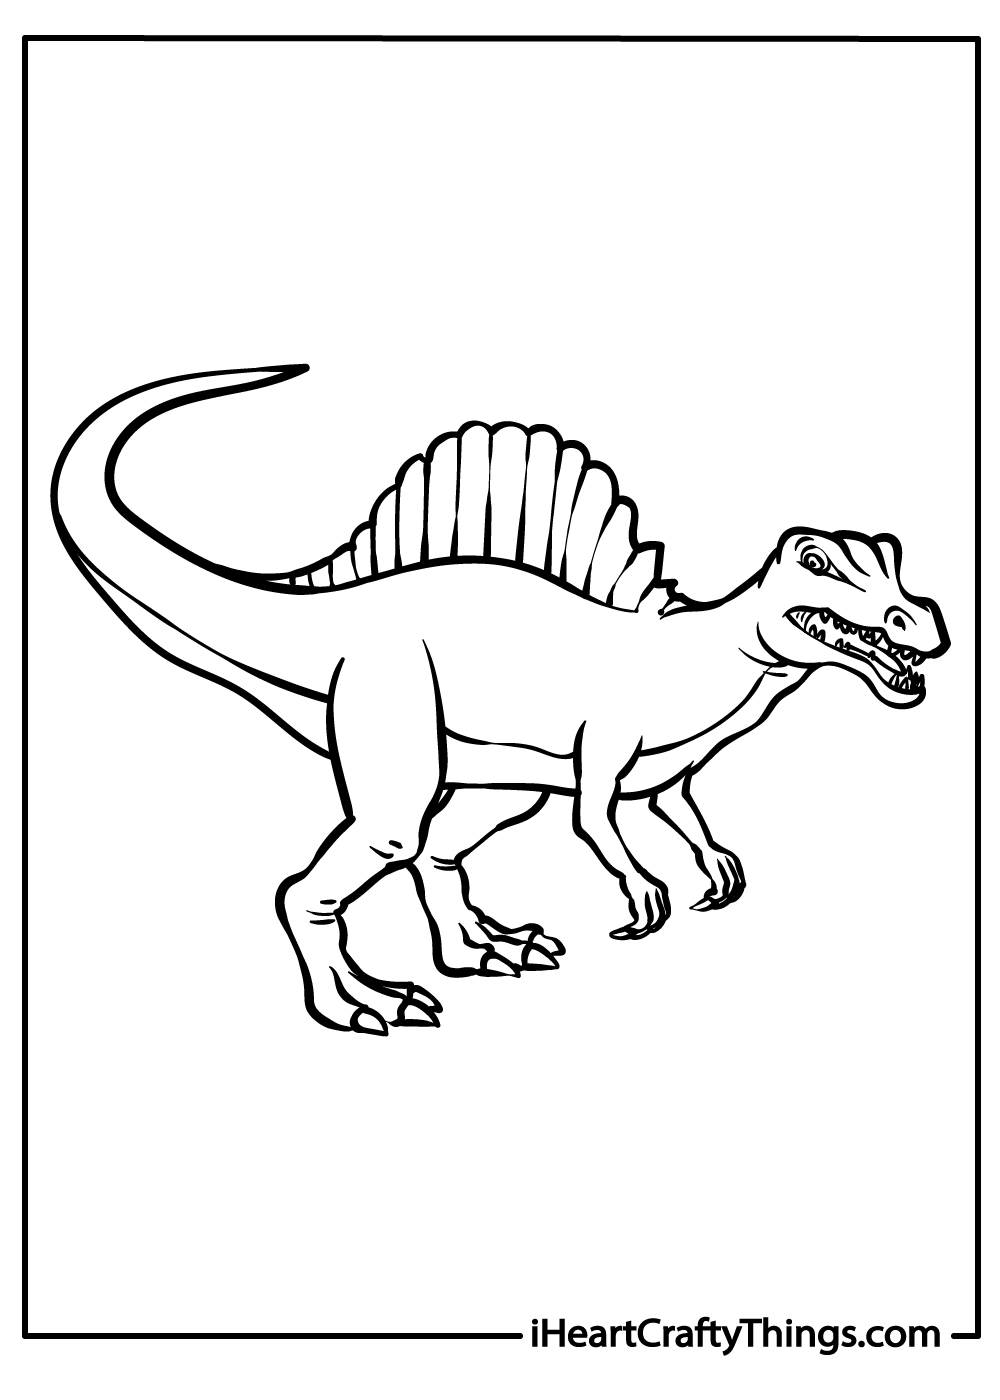 Spinosaurus coloring pages free printables